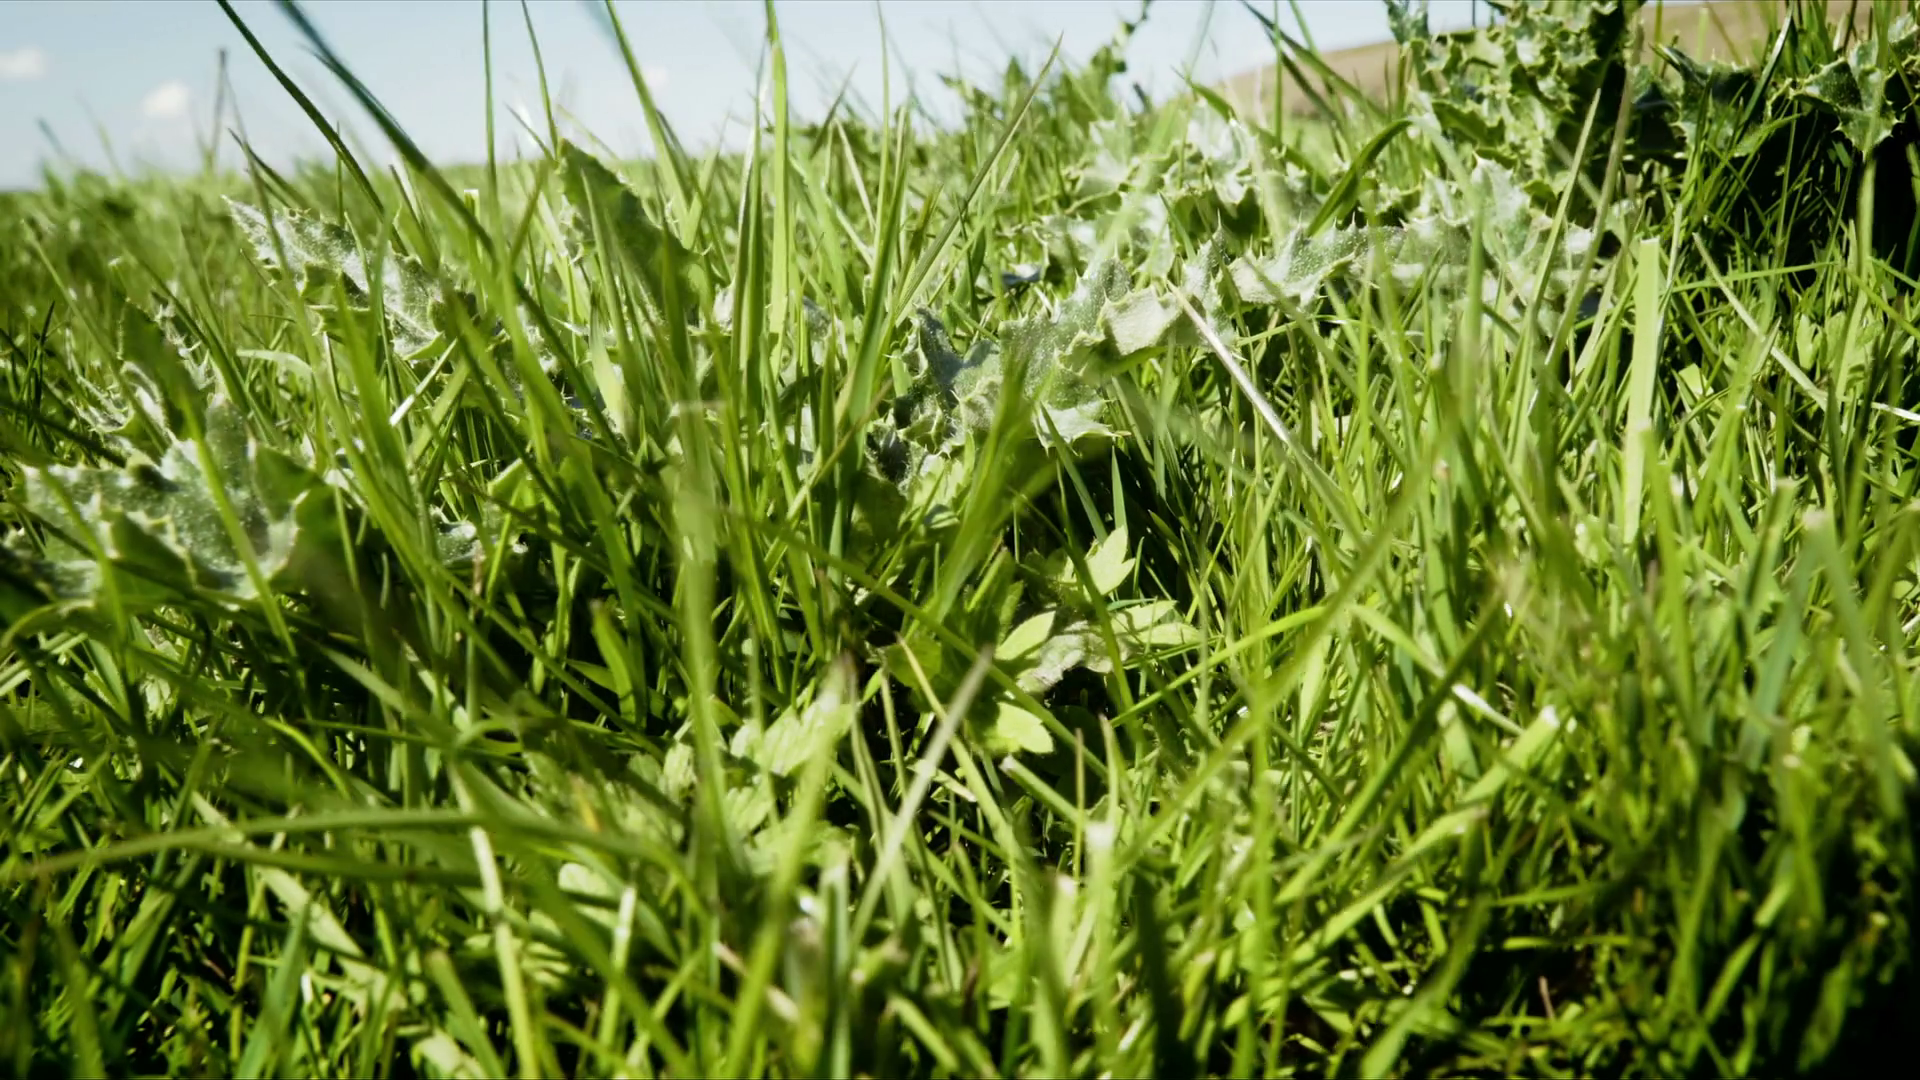 Wild grass blowing in the wind stock footage. Vivid green grass ...